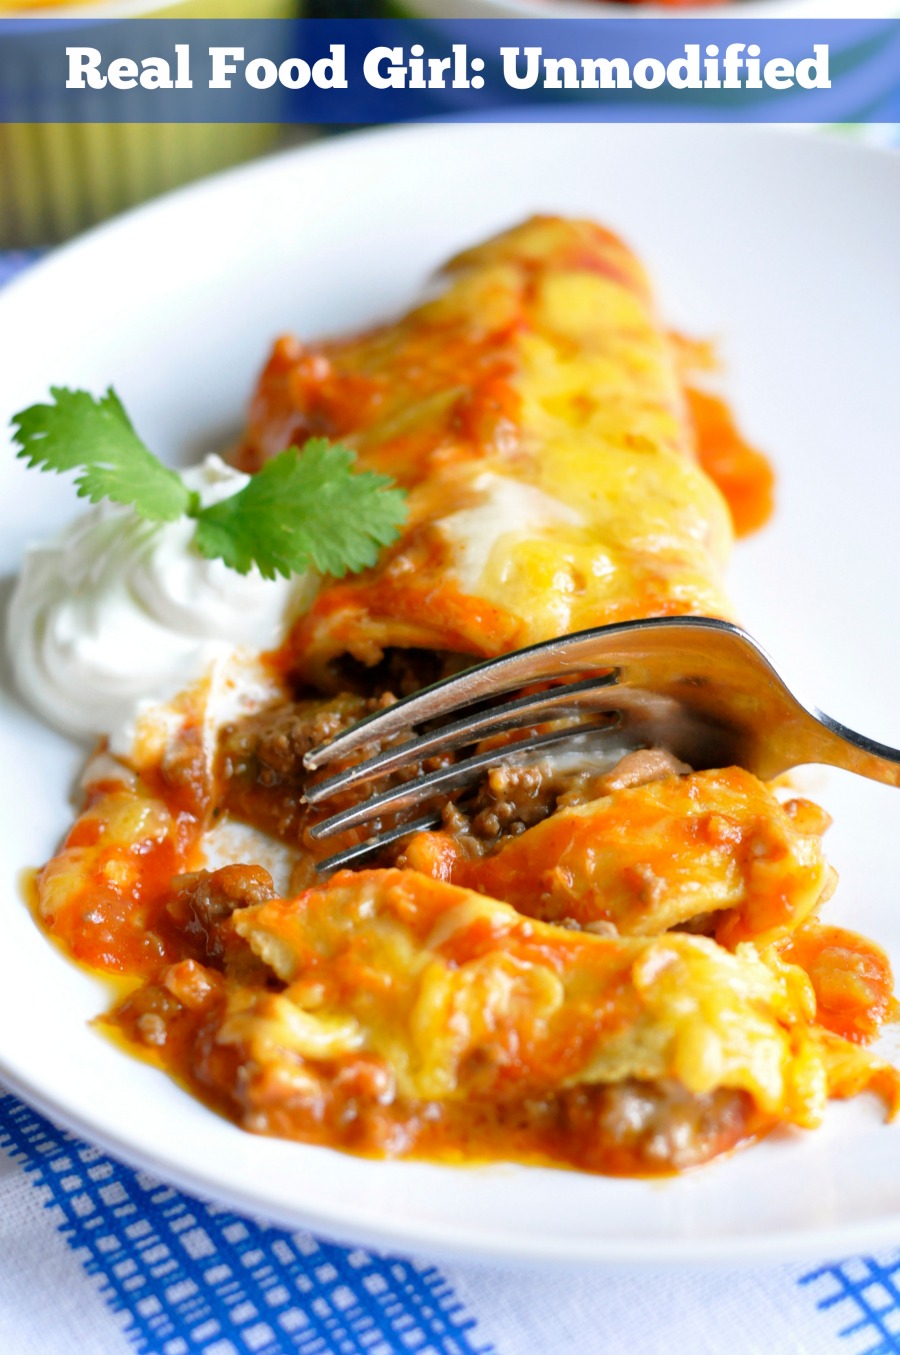 30-Minute Mondays- Beef & Bean Enchiladas by Real Food Girl Unmodified Pinning this for later!